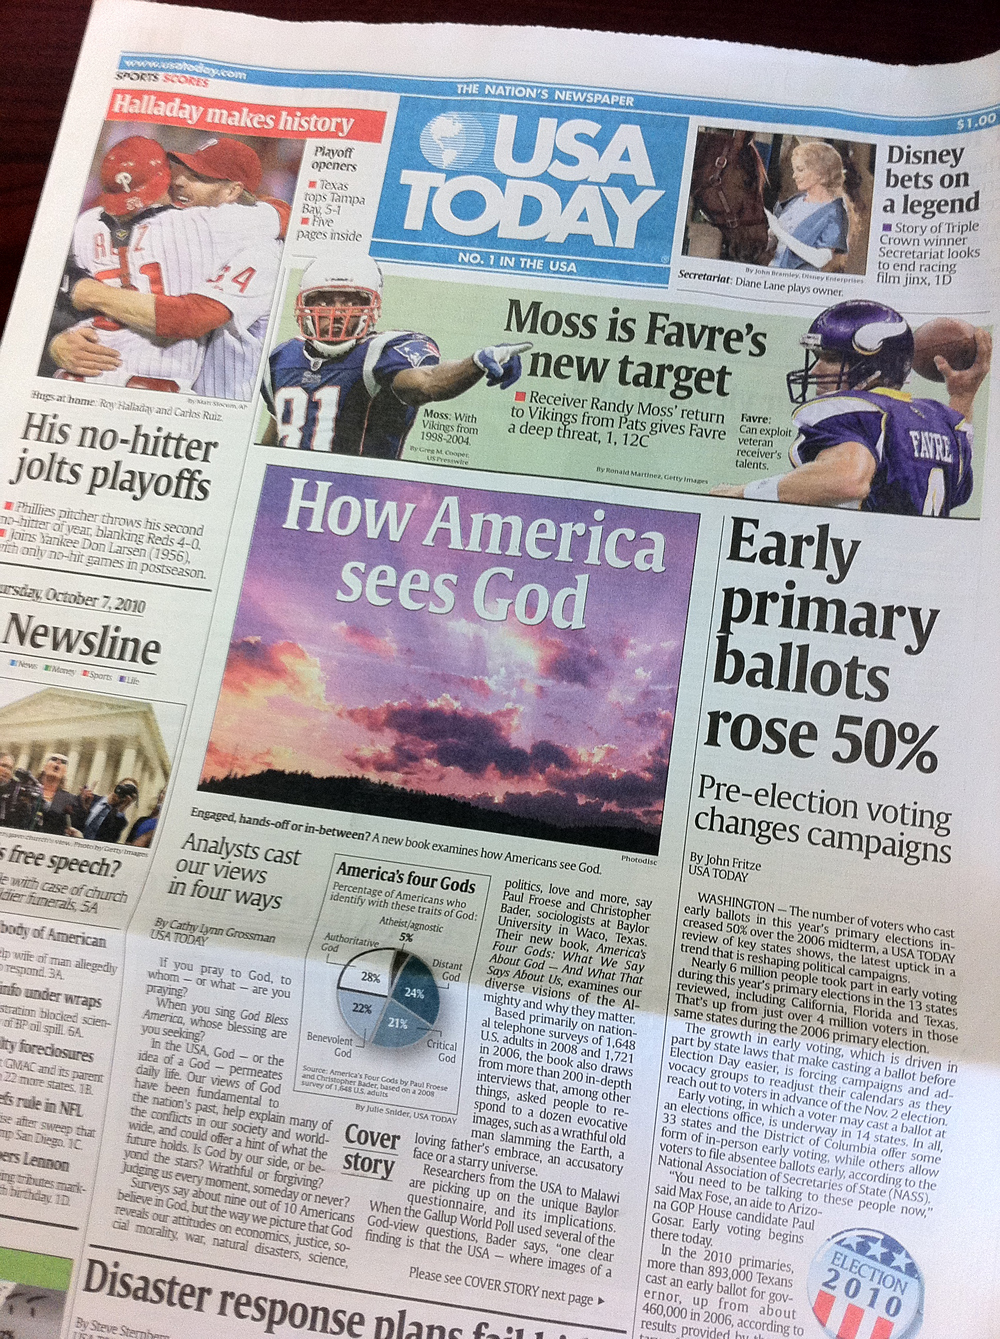 See Back to the Futures USA Today front page at 